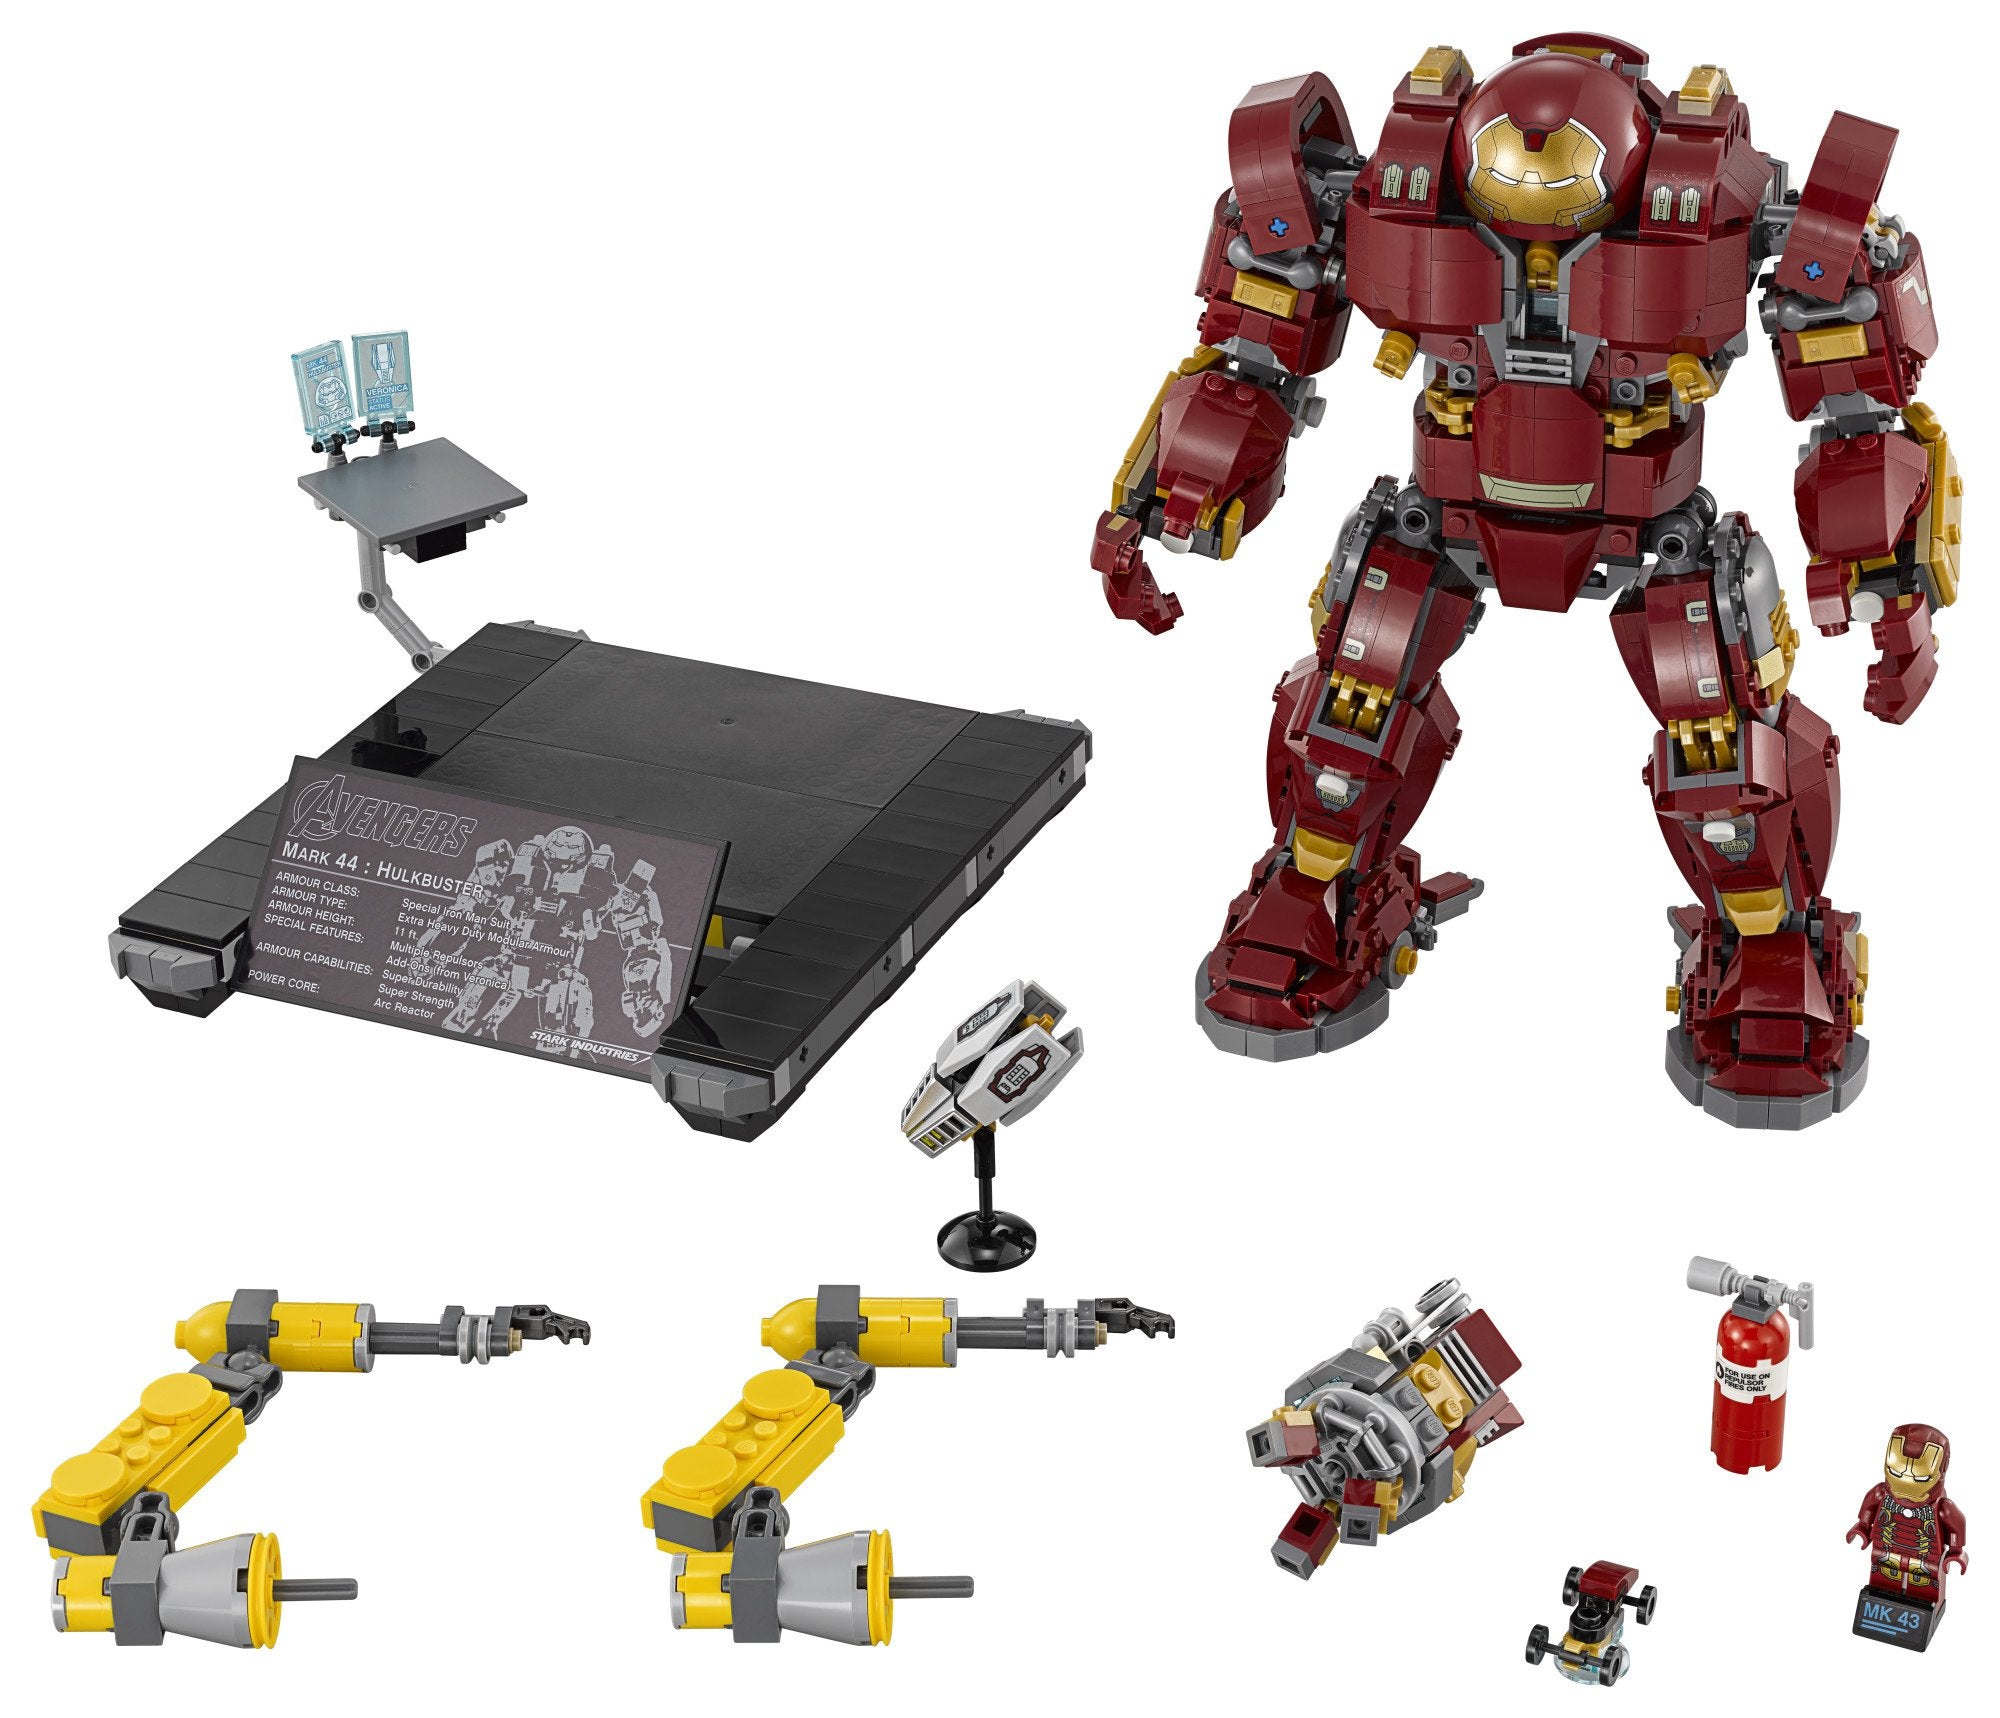 LEGO Marvel Super Heroes Avengers: Infinity War The Hulkbuster: Ultron Edition 76105 Building Kit (1363 Piece)